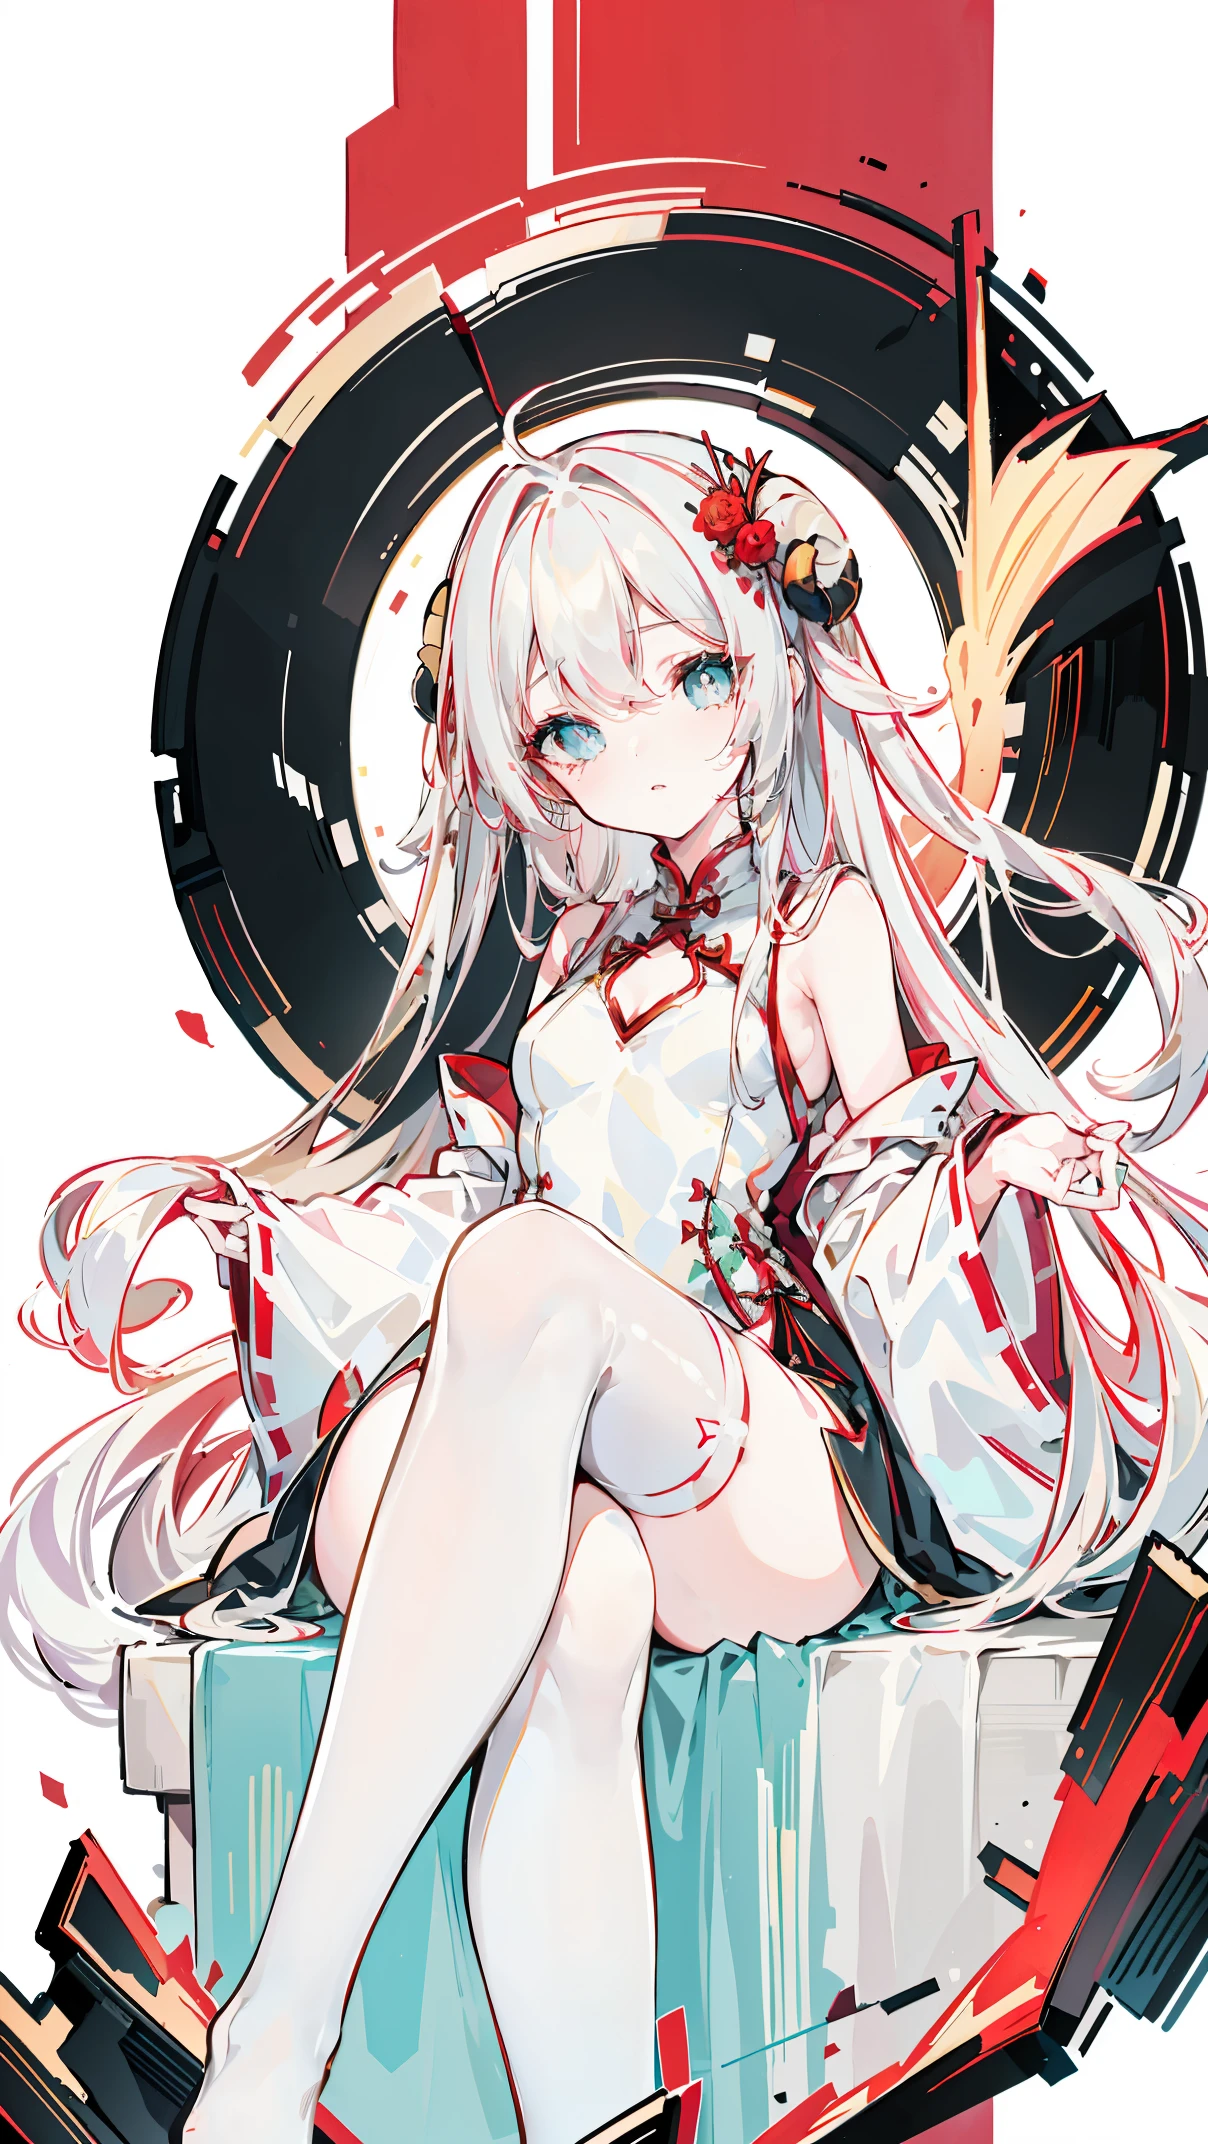 a girl，Sheep&#39;s horn, full color,  long white hair, Red eyes ，Eyeliner,  black transparent clothes, Red, open air, Rose, night, ruins, Butterfly，mine same as the original, mine, , (:1.2)
rest, (cheongsam), (view from below), (Put your arms behind your back), (wild lift), thin dress, Crotch cutout, best quality, high resolution, unified 8k wallpaper, (illustration:0.8), (Beautiful and delicate eyes:1.6), extremely detailed face, perfect lighting, Very detailed cg, (perfect hands, perfect anatomy),soles of feet，sitting，blond，red lips，Acting cute，Feet close up，up-close，Complete feet，white stockings，close up